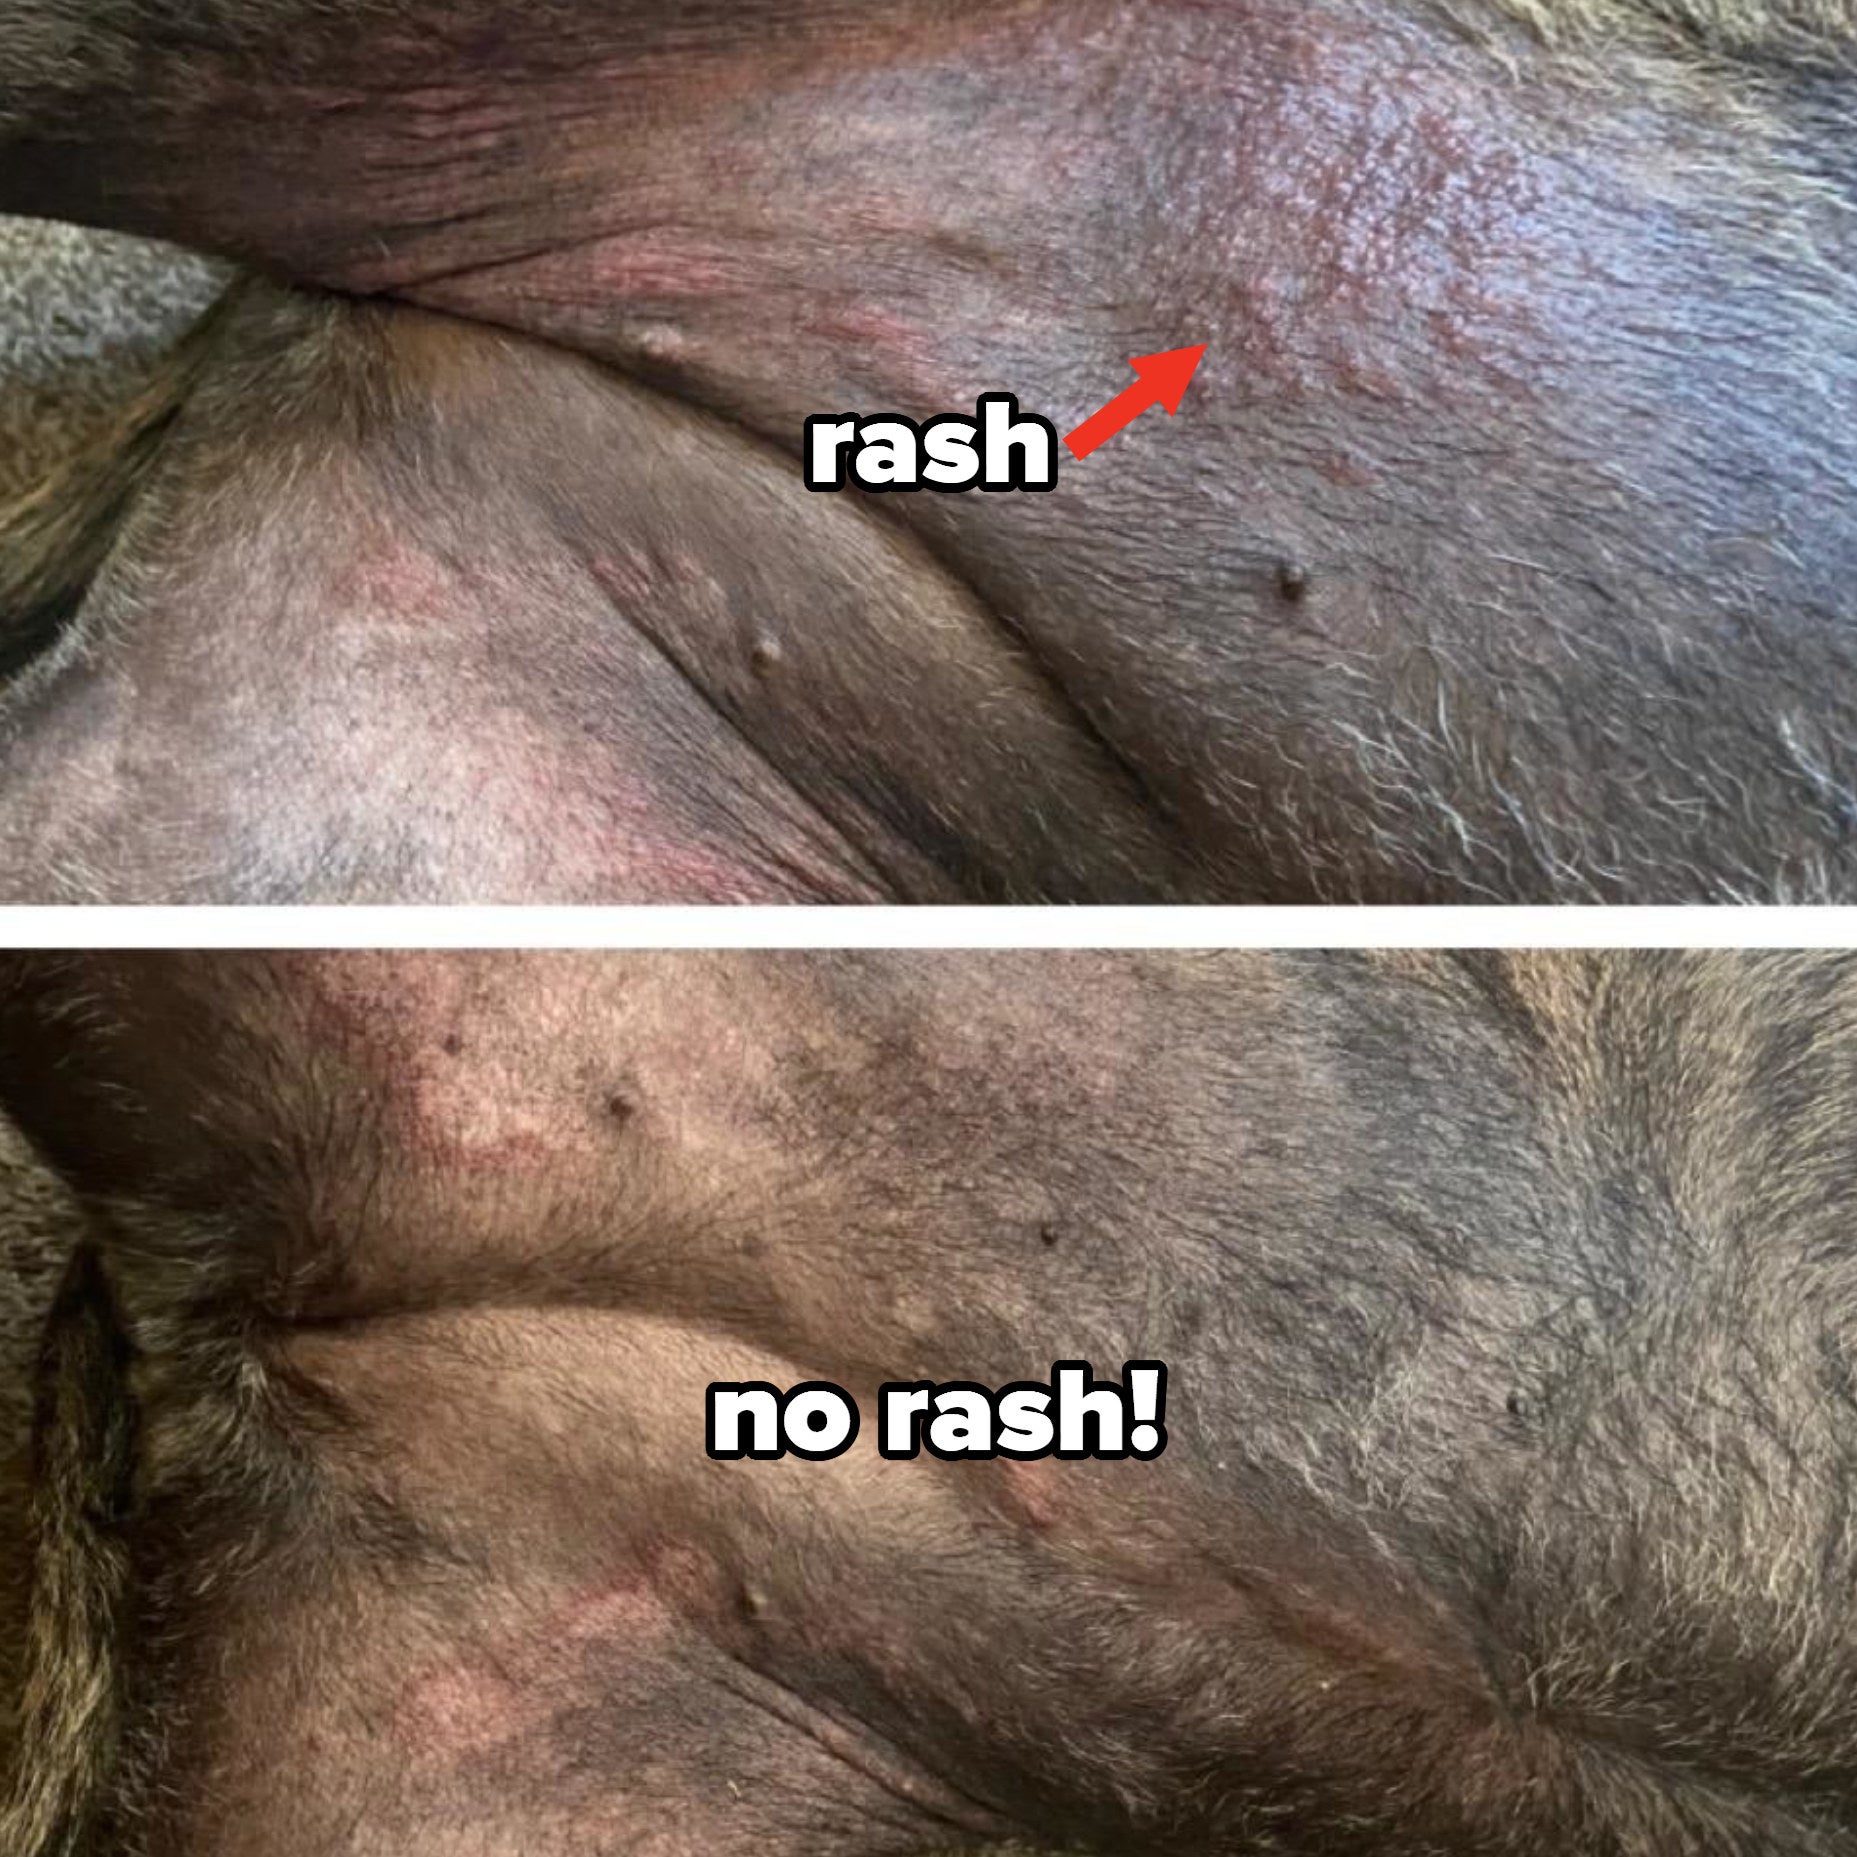 A dog before and after using the conditioner, showing how their rash has cleared